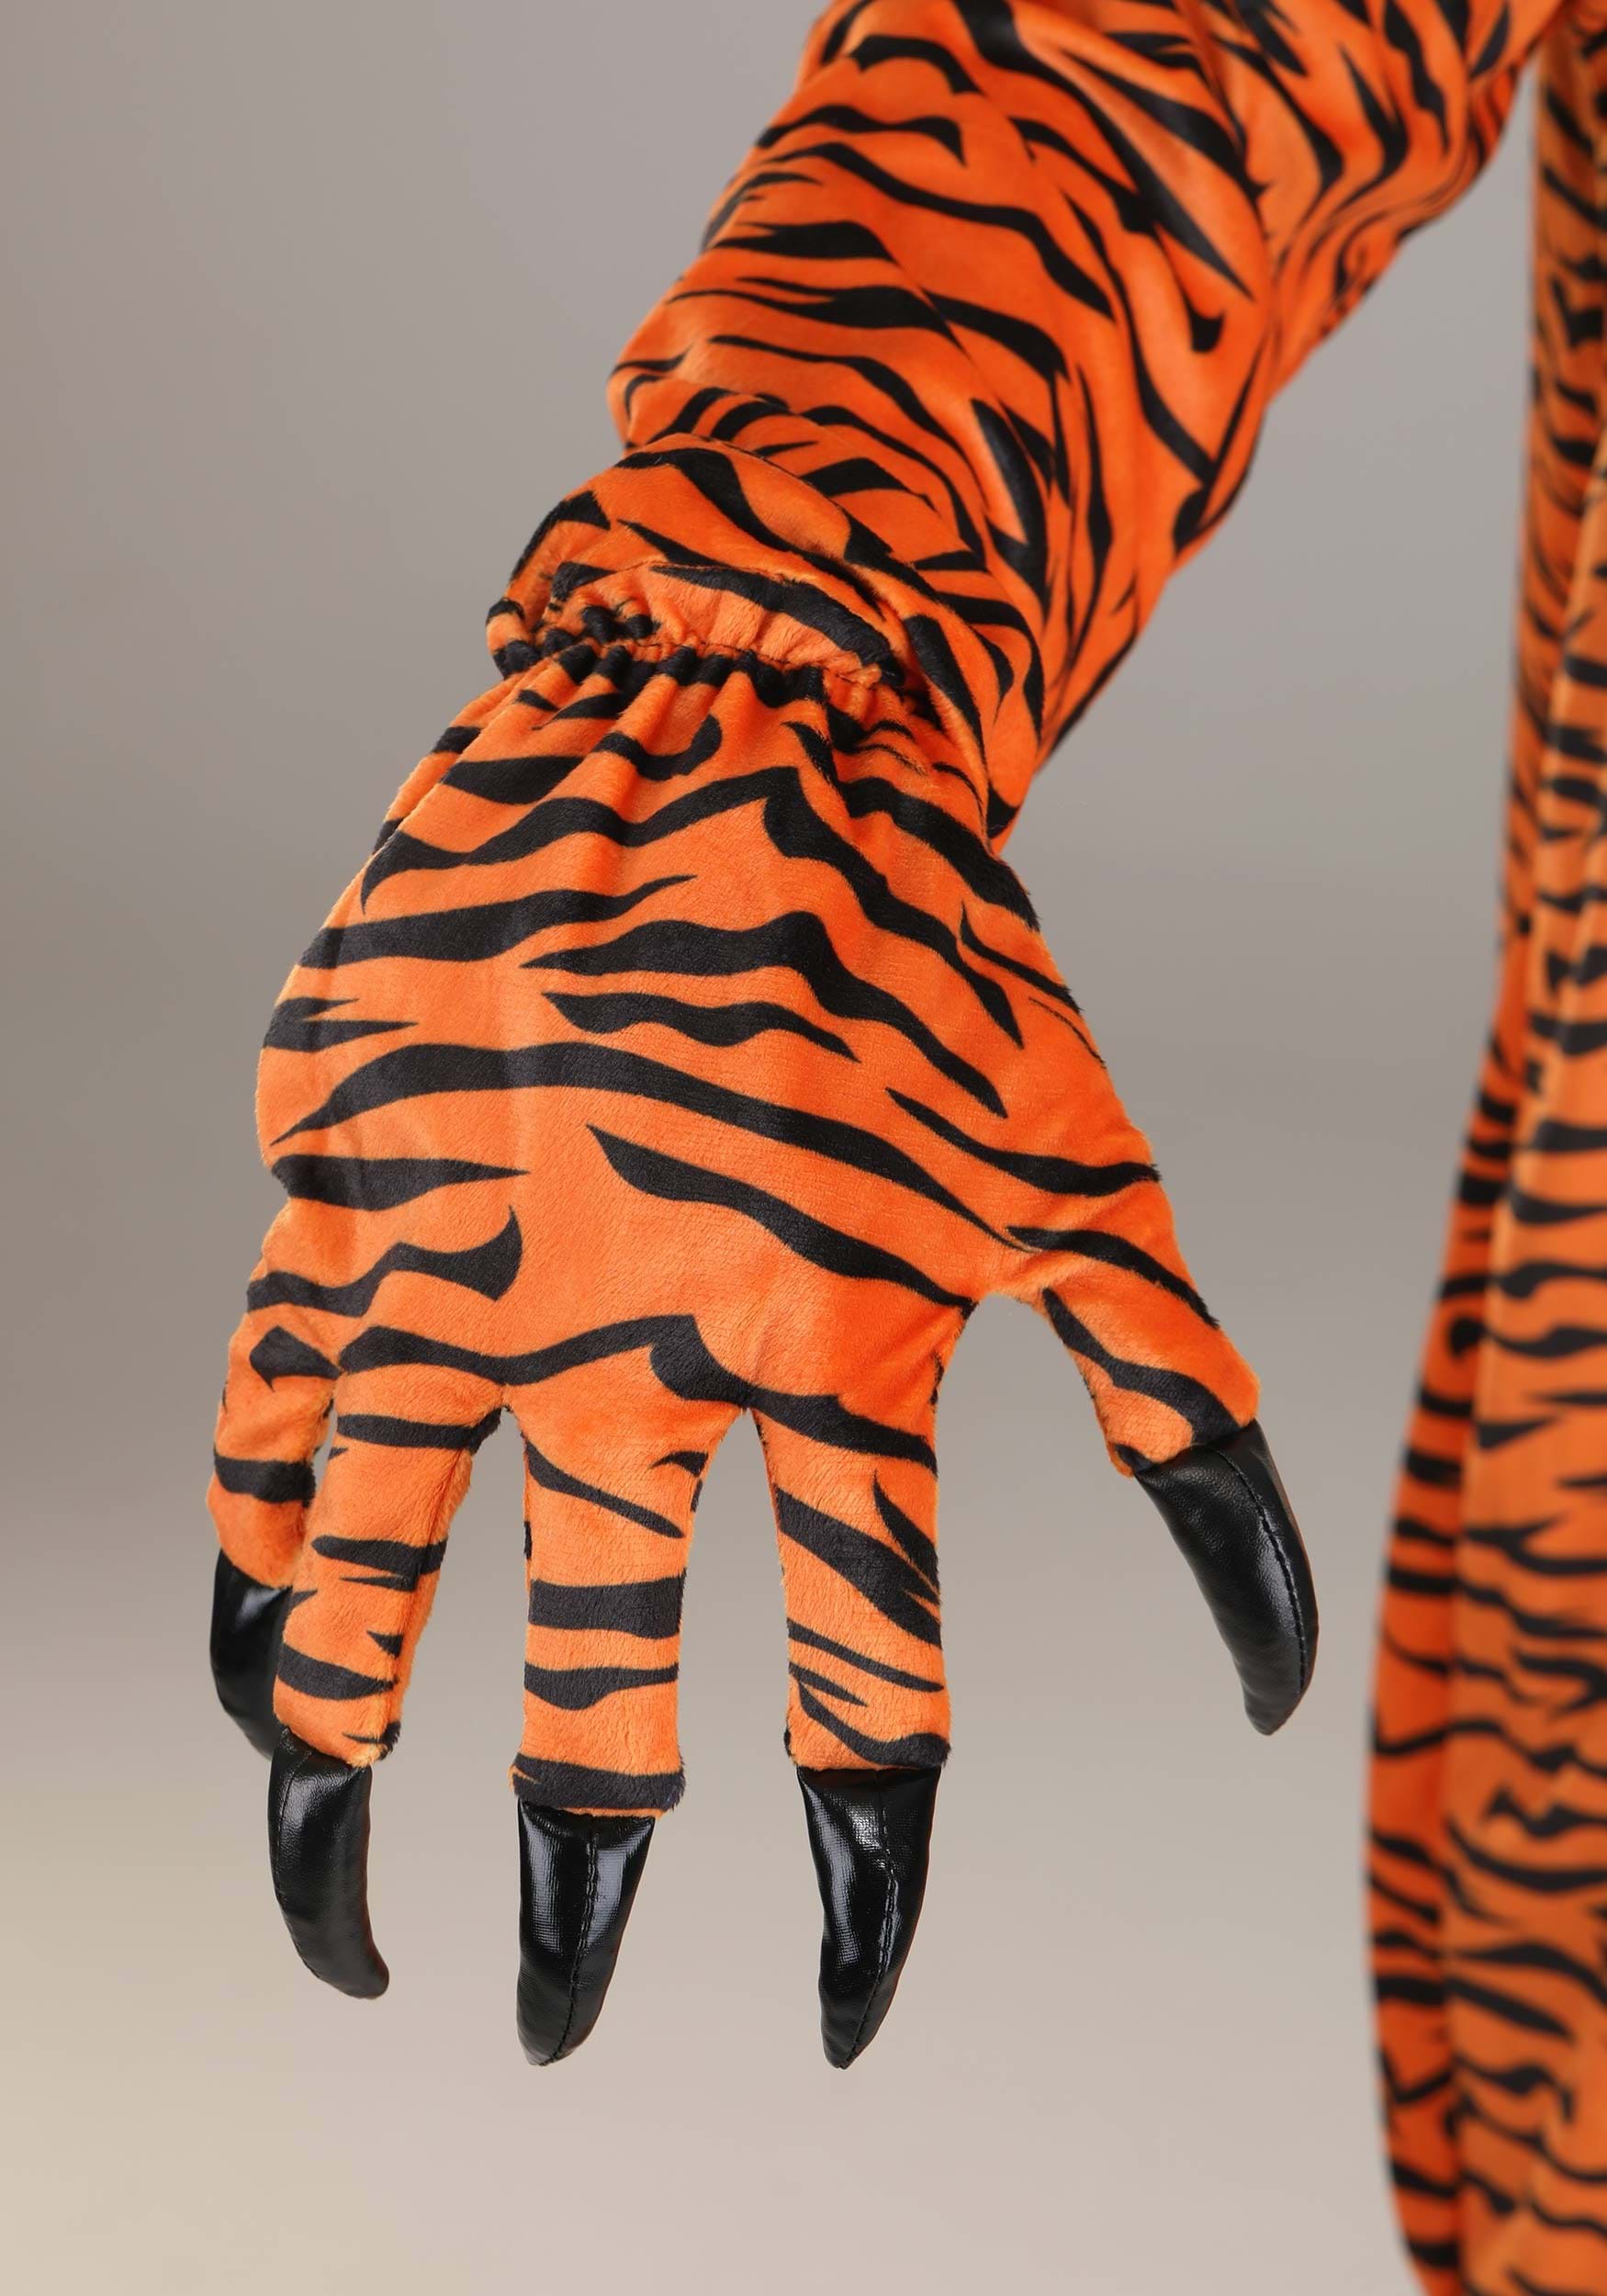 Jawesome Adult Tiger Costume